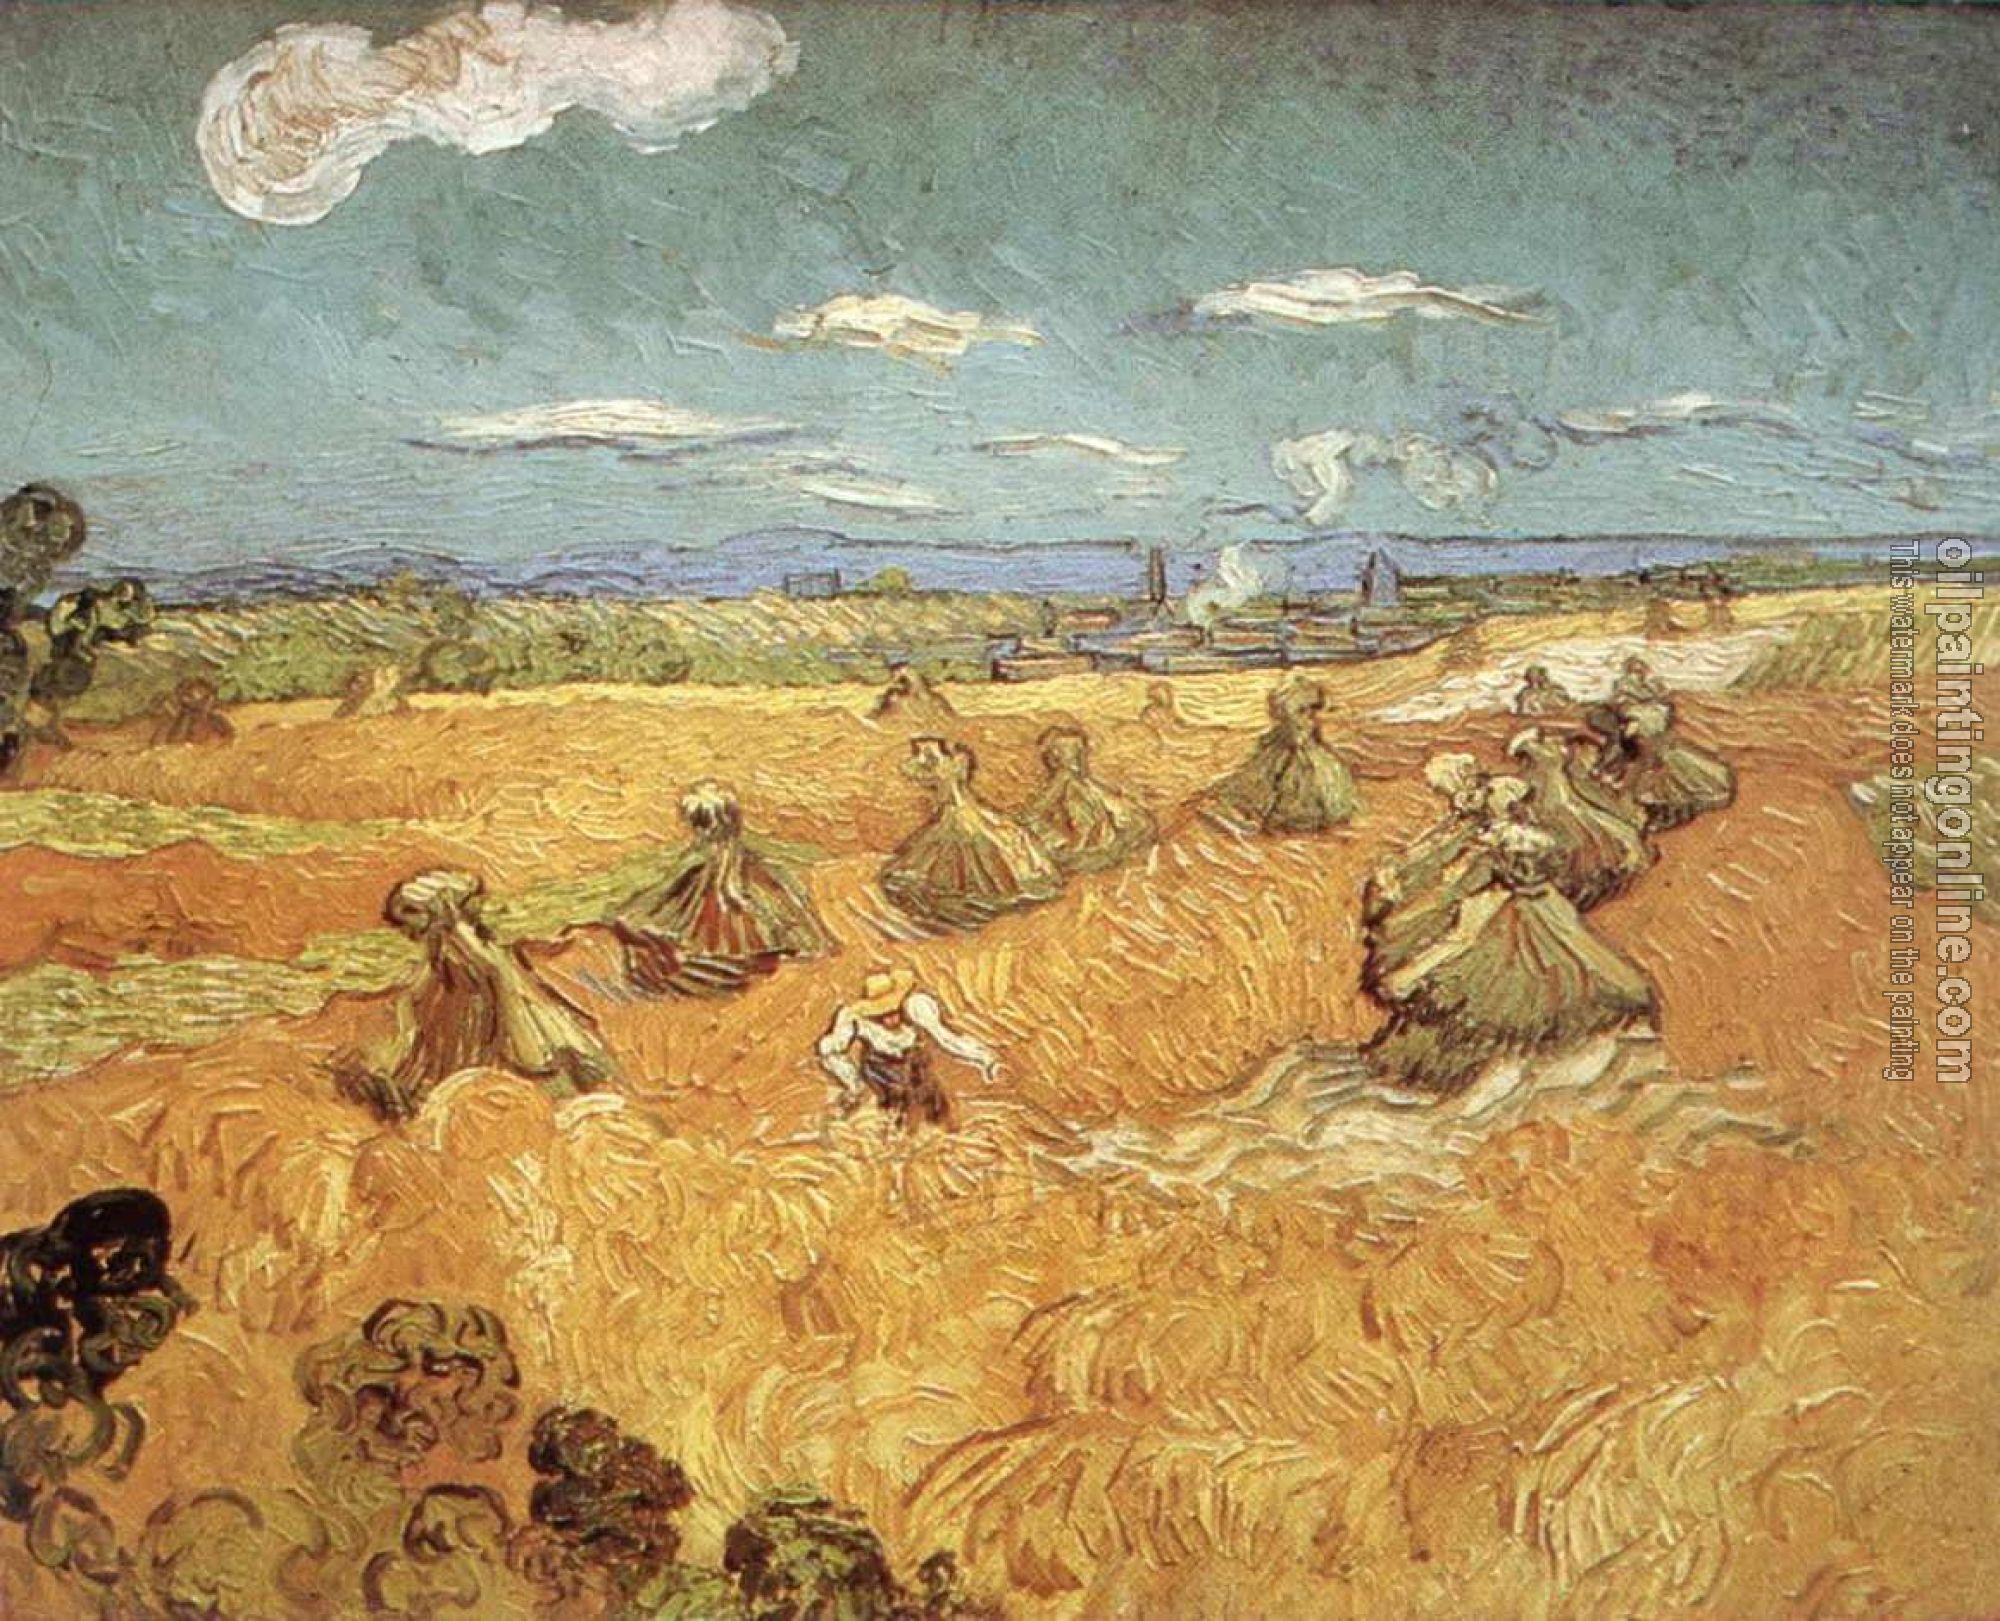 Gogh, Vincent van - Wheat Stacks with Reaper